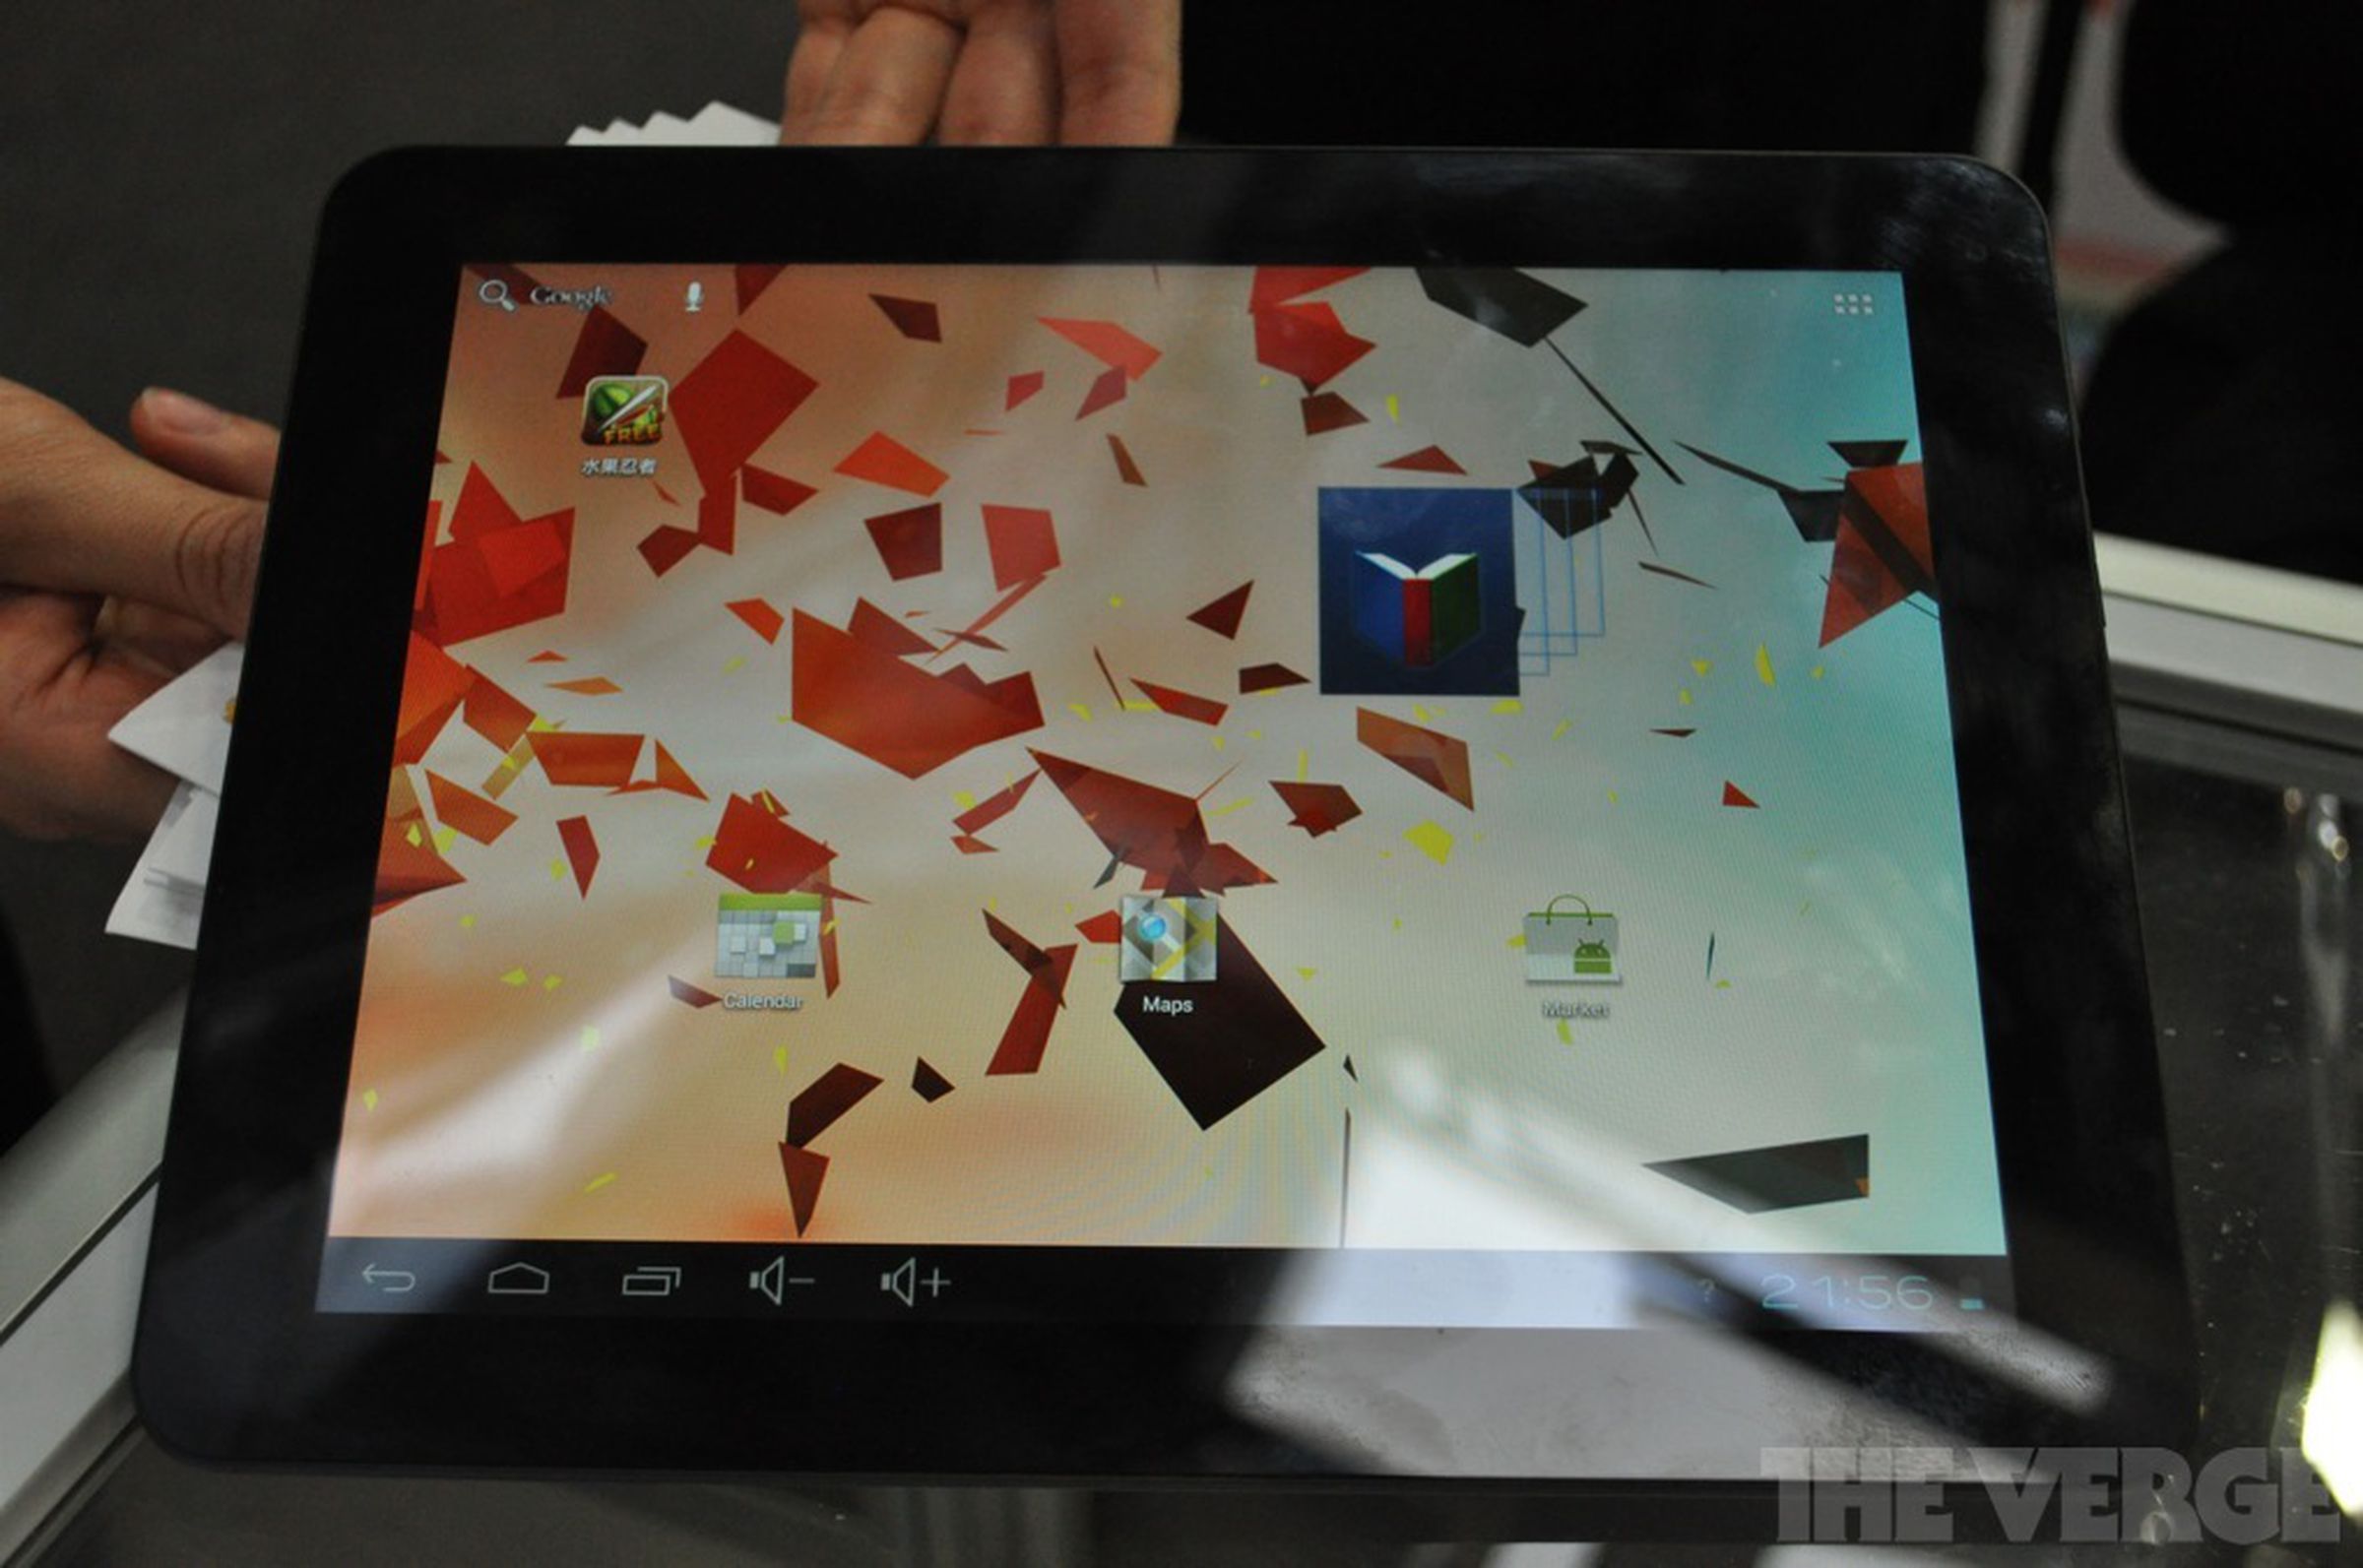 Viota M970 Android tablet hands-on images